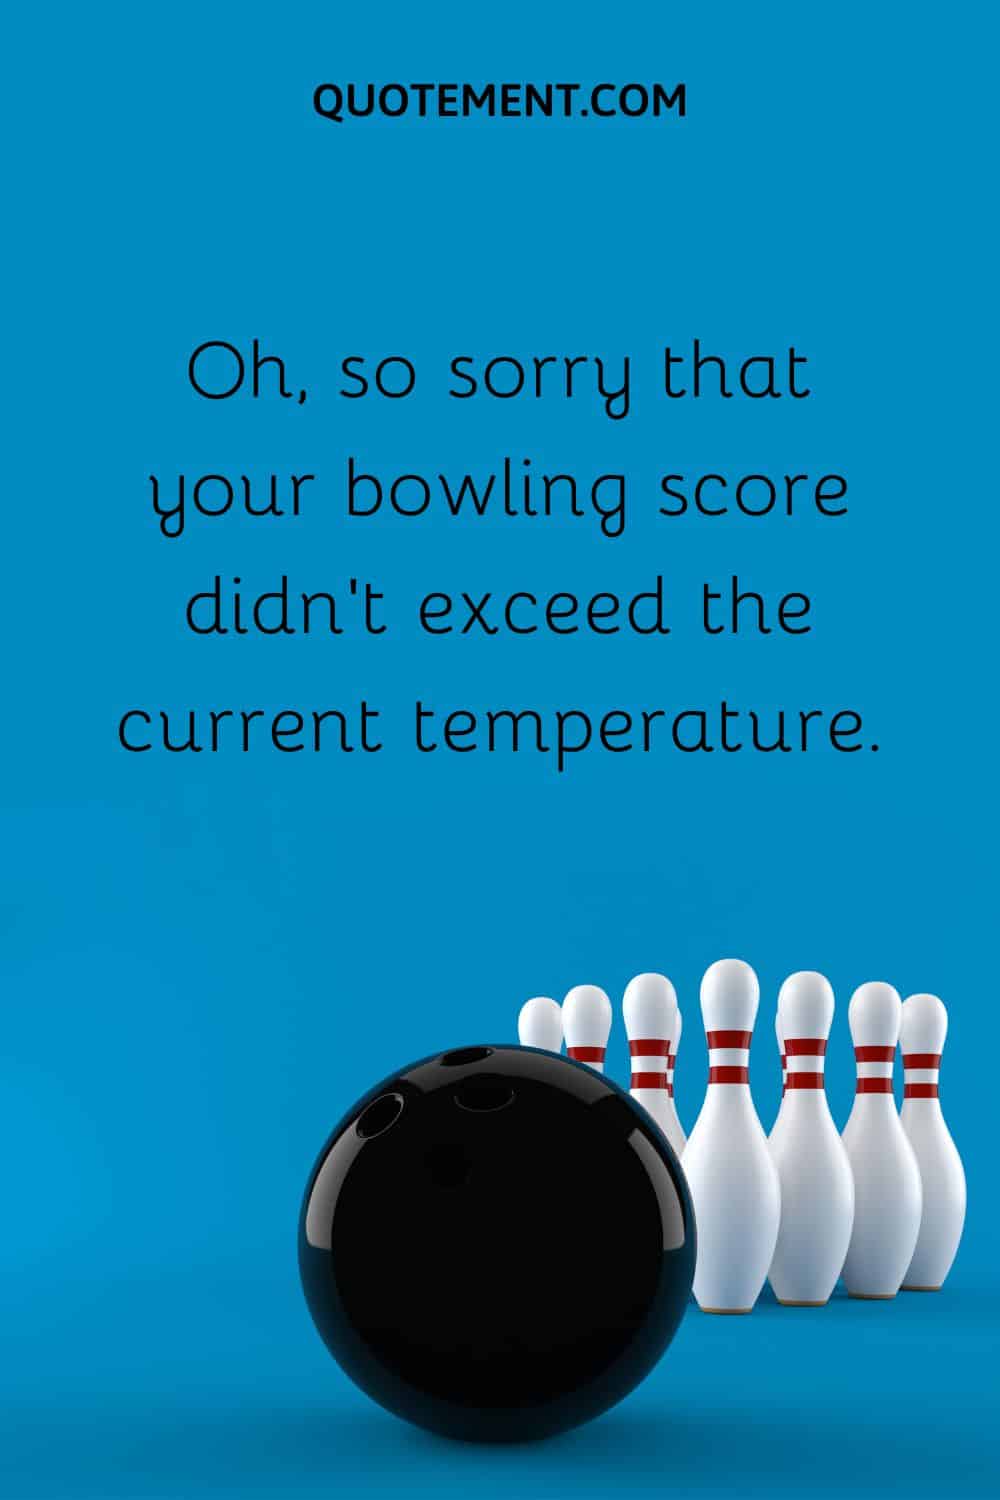 Oh, so sorry that your bowling score didn’t exceed the current temperature